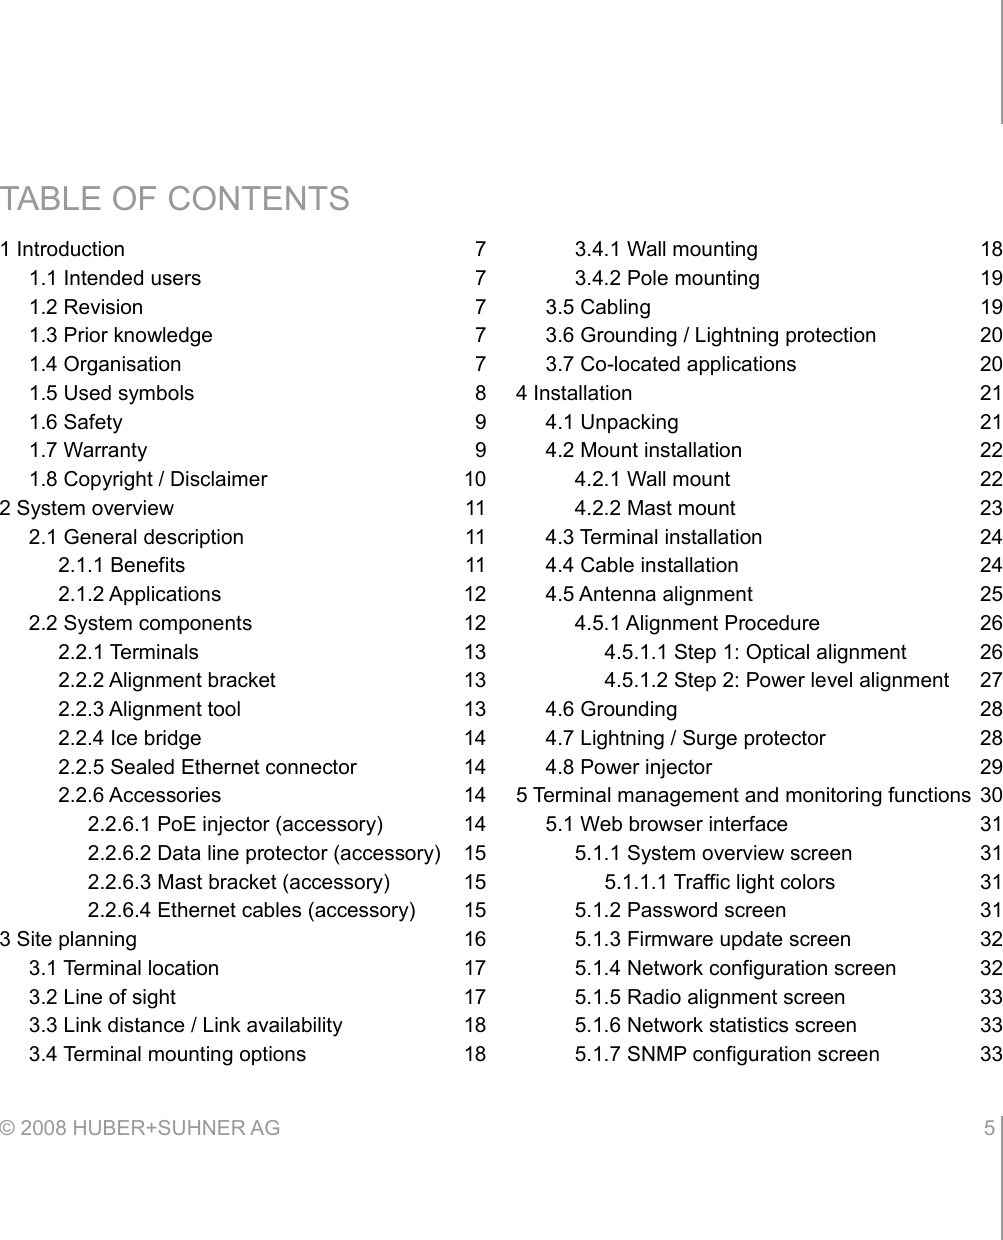 TABLE OF CONTENTS1 Introduction 71.1 Intended users 71.2 Revision 71.3 Prior knowledge 71.4 Organisation 71.5 Used symbols 81.6 Safety 91.7 Warranty 91.8 Copyright / Disclaimer 102 System overview 112.1 General description 112.1.1 Benefits 112.1.2 Applications 122.2 System components 122.2.1 Terminals 132.2.2 Alignment bracket 132.2.3 Alignment tool 132.2.4 Ice bridge 142.2.5 Sealed Ethernet connector 142.2.6 Accessories 142.2.6.1 PoE injector (accessory) 142.2.6.2 Data line protector (accessory) 152.2.6.3 Mast bracket (accessory) 152.2.6.4 Ethernet cables (accessory) 153 Site planning 163.1 Terminal location 173.2 Line of sight 173.3 Link distance / Link availability 183.4 Terminal mounting options 183.4.1 Wall mounting 183.4.2 Pole mounting 193.5 Cabling 193.6 Grounding / Lightning protection 203.7 Co-located applications 204 Installation 214.1 Unpacking 214.2 Mount installation 224.2.1 Wall mount 224.2.2 Mast mount 234.3 Terminal installation 244.4 Cable installation 244.5 Antenna alignment 254.5.1 Alignment Procedure 264.5.1.1 Step 1: Optical alignment 264.5.1.2 Step 2: Power level alignment 274.6 Grounding 284.7 Lightning / Surge protector 284.8 Power injector 295 Terminal management and monitoring functions 305.1 Web browser interface 315.1.1 System overview screen 315.1.1.1 Traffic light colors 315.1.2 Password screen 315.1.3 Firmware update screen 325.1.4 Network configuration screen 325.1.5 Radio alignment screen 335.1.6 Network statistics screen 335.1.7 SNMP configuration screen 33© 2008 HUBER+SUHNER AG 5 